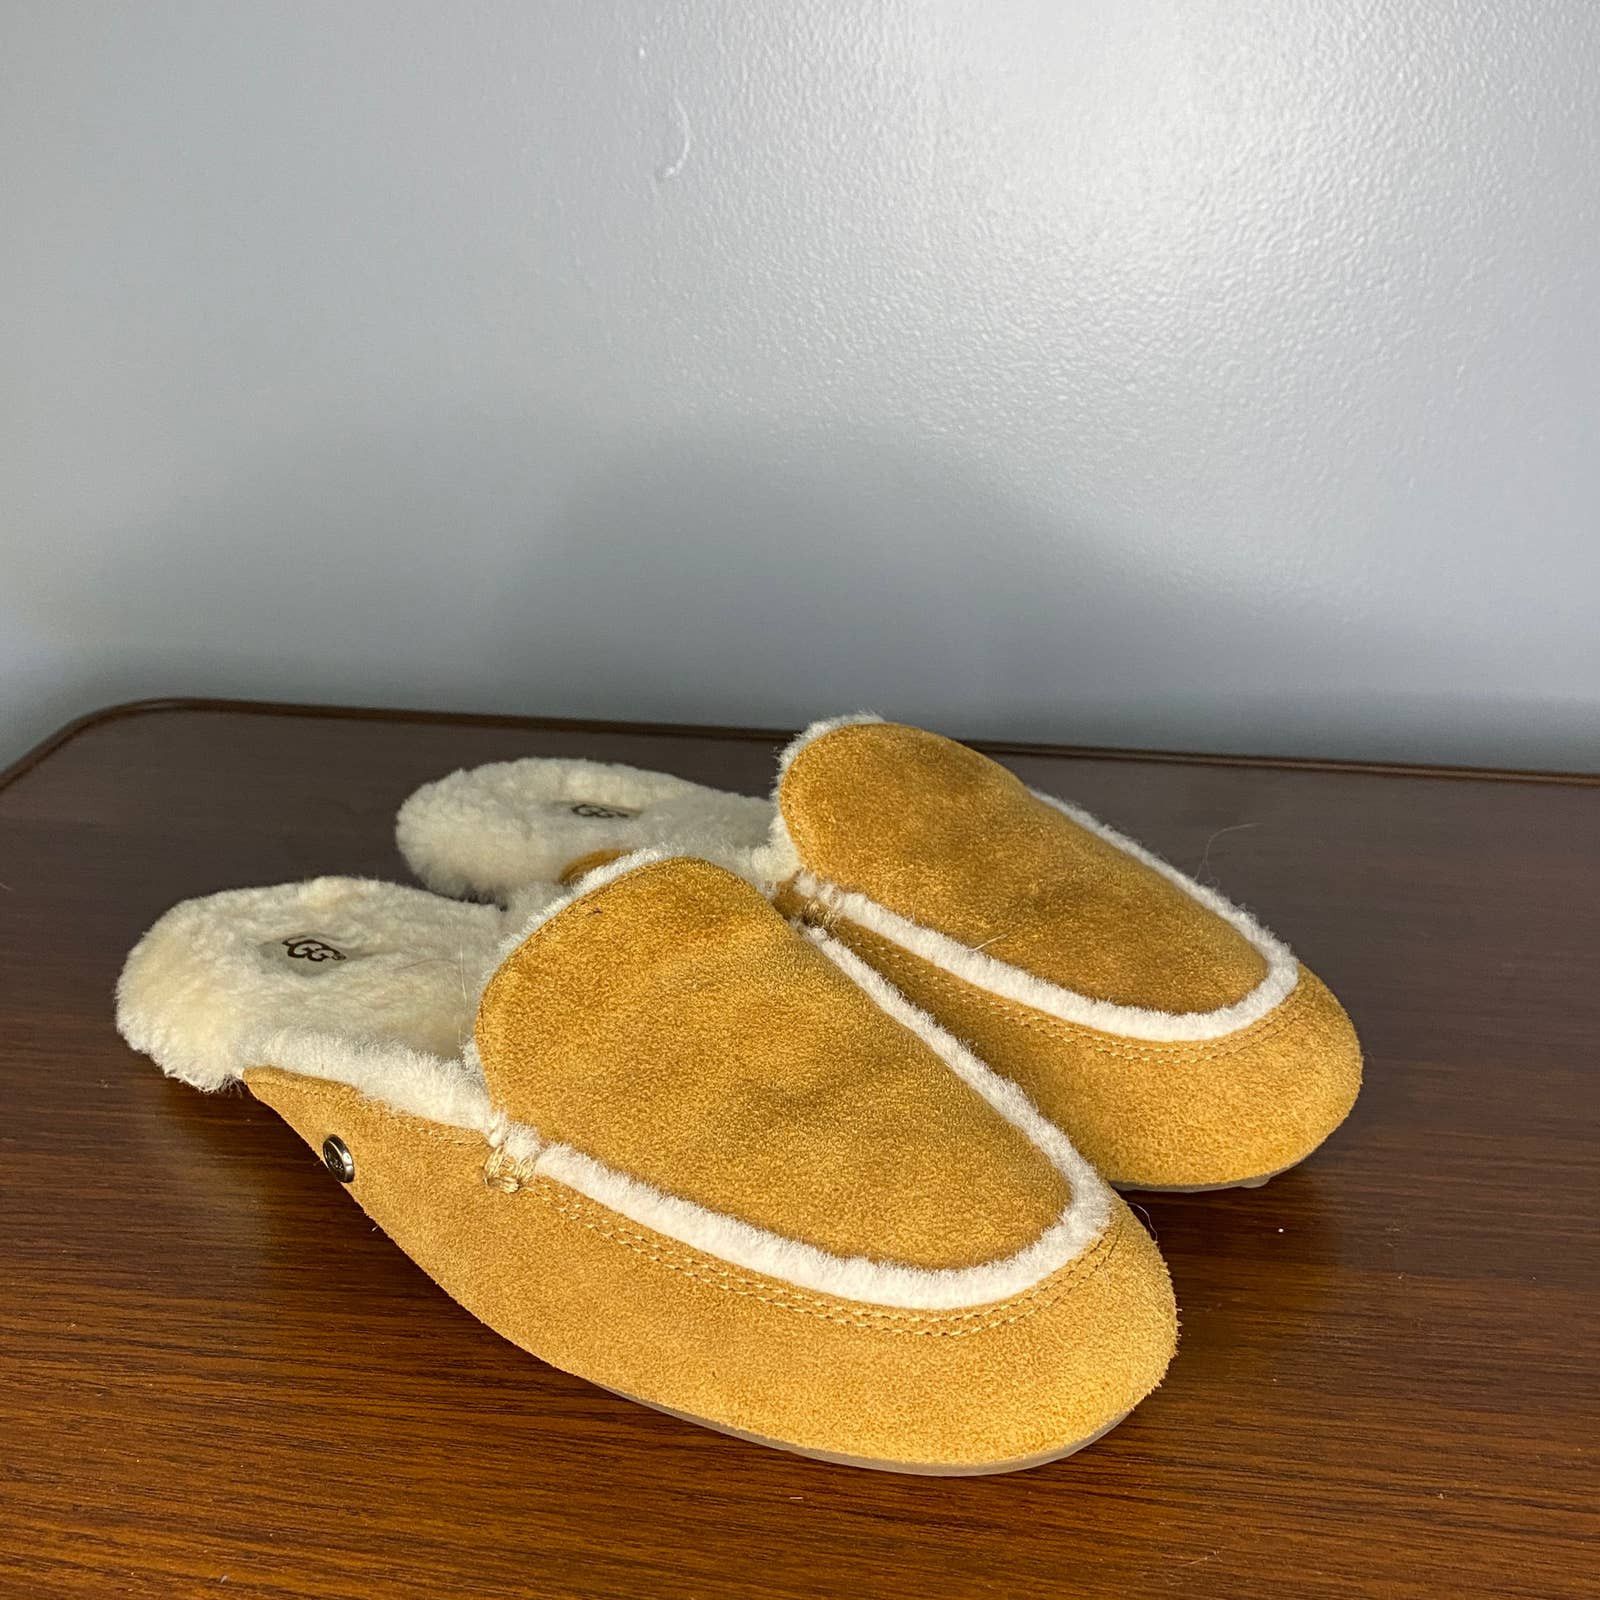 Ugg UGG Mule Slide Slippers Size USA 7 Size US 7 / IT 37 - 2 Preview